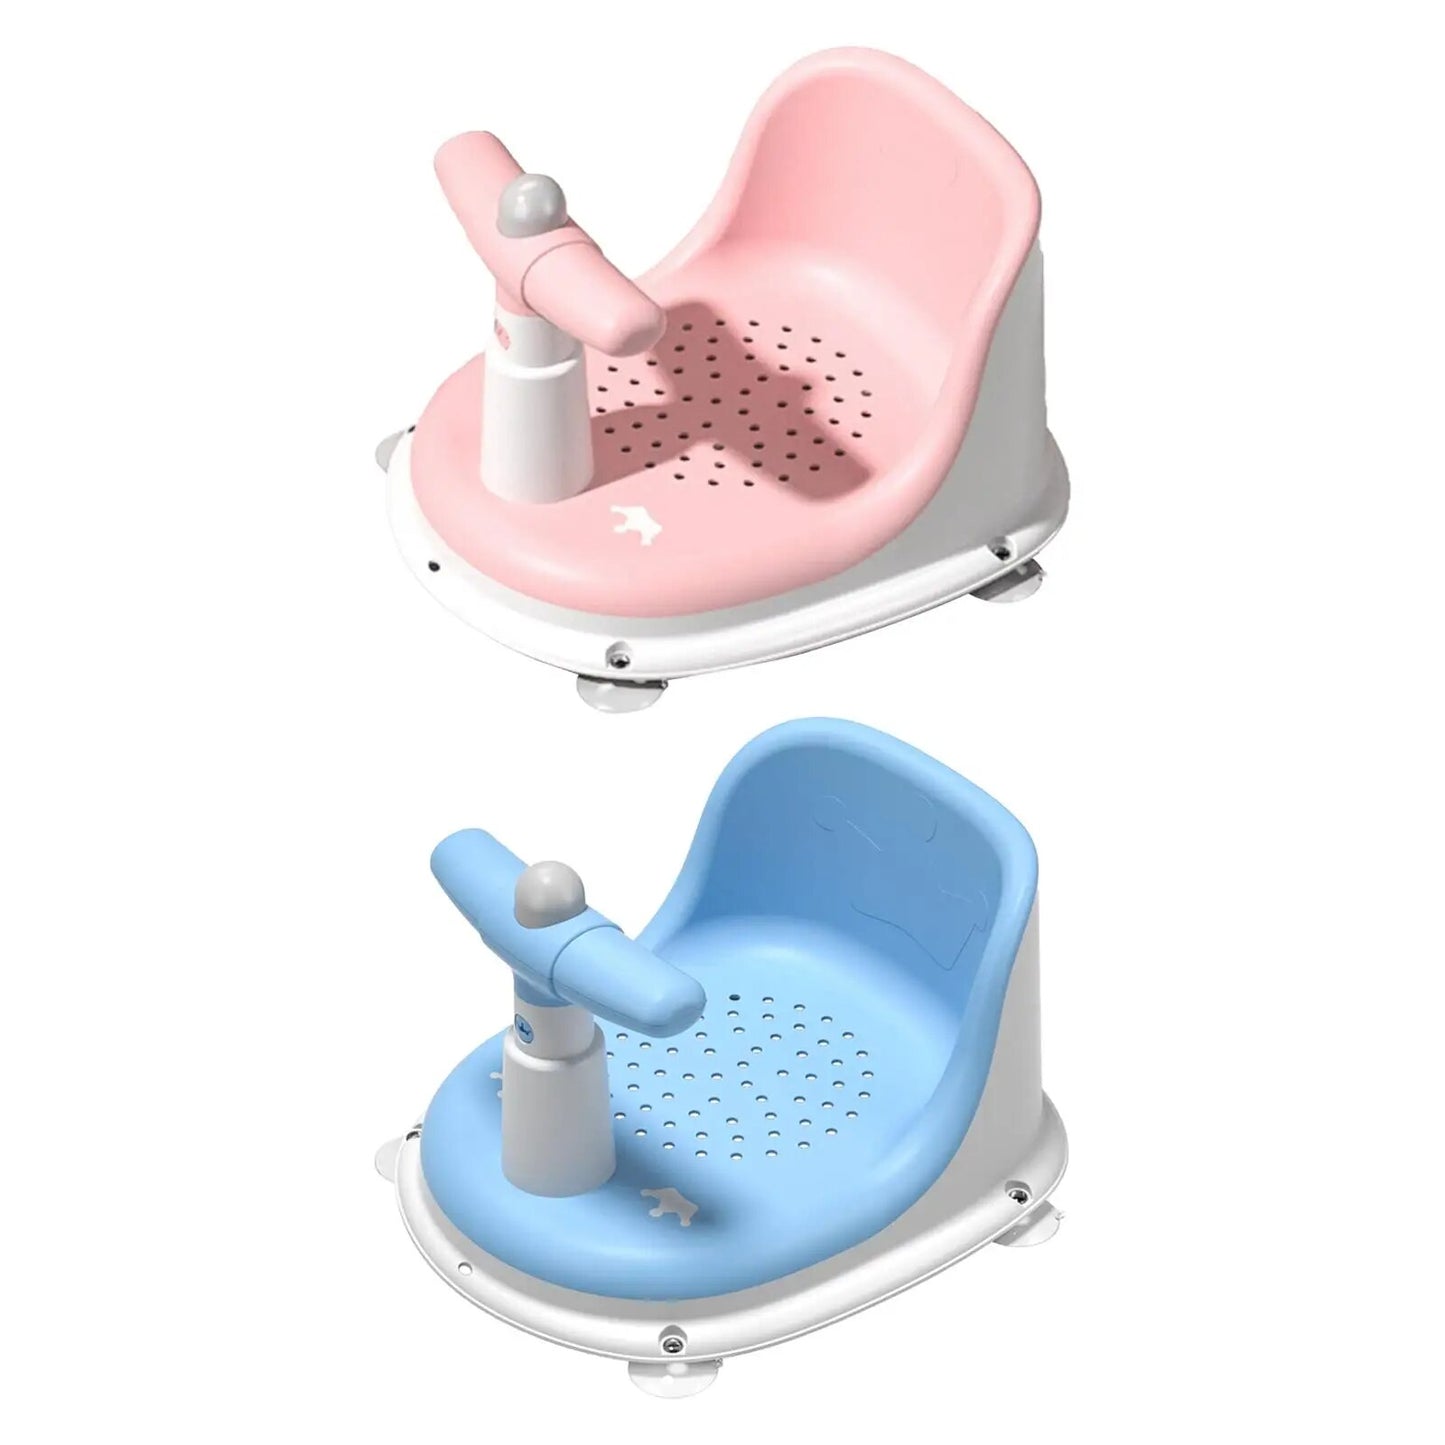 Baby Bath Tub Seat with Squeaker Sound